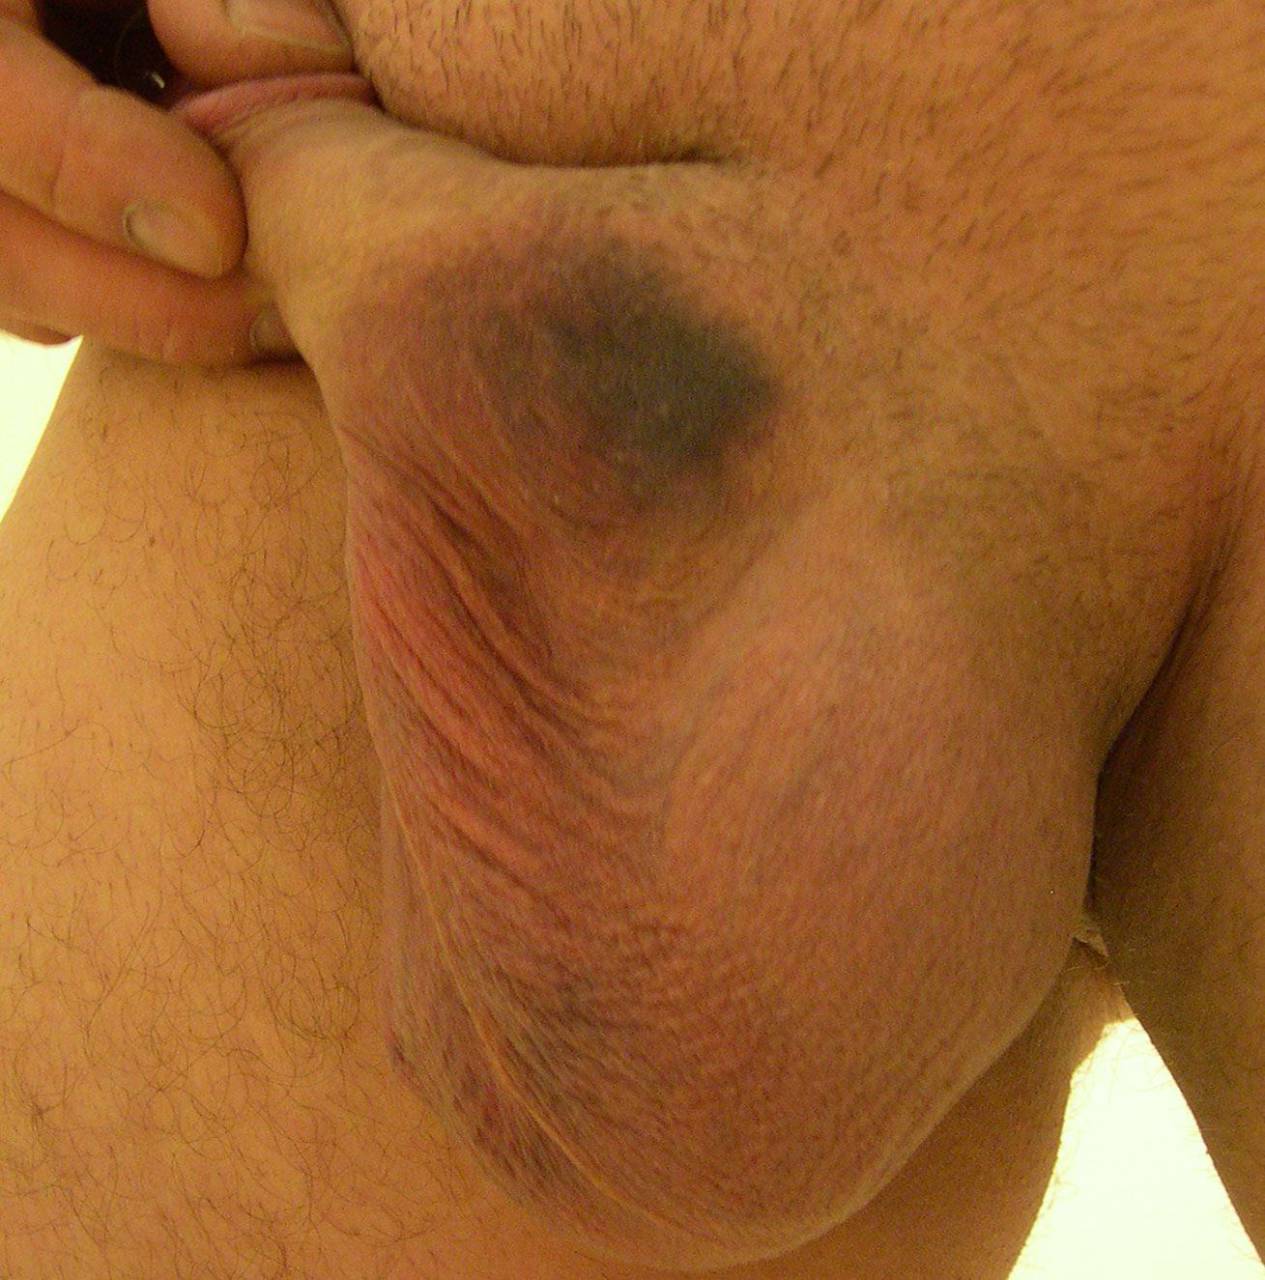 Swelling and bruising 5 days after a vasectomy.